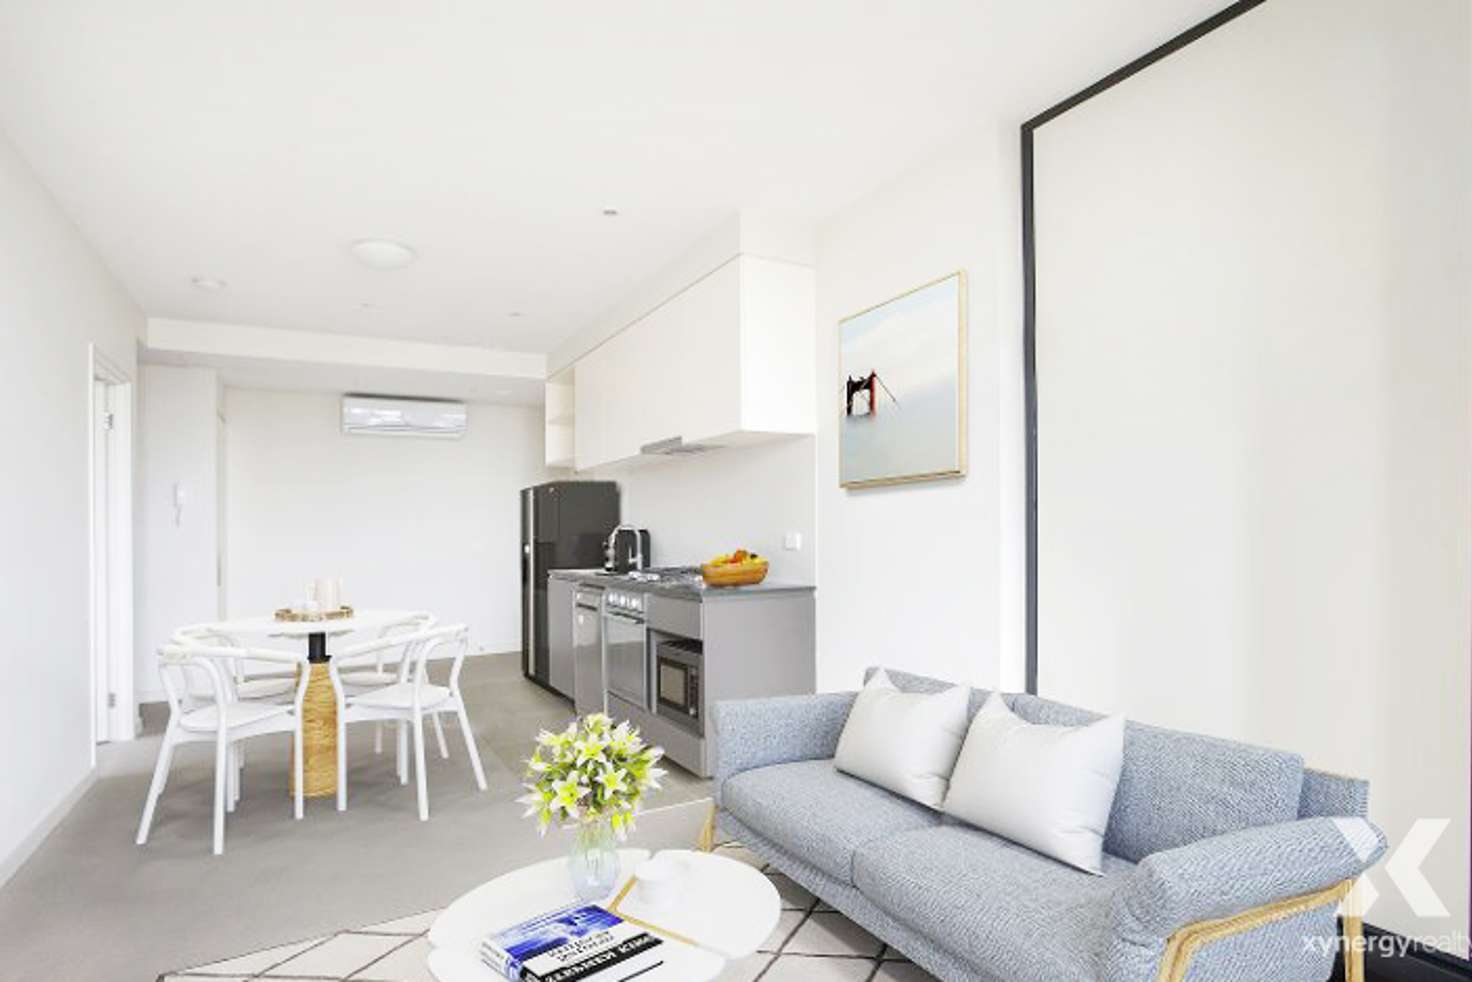 Main view of Homely apartment listing, 6205/568 Collins Street, Melbourne VIC 3000